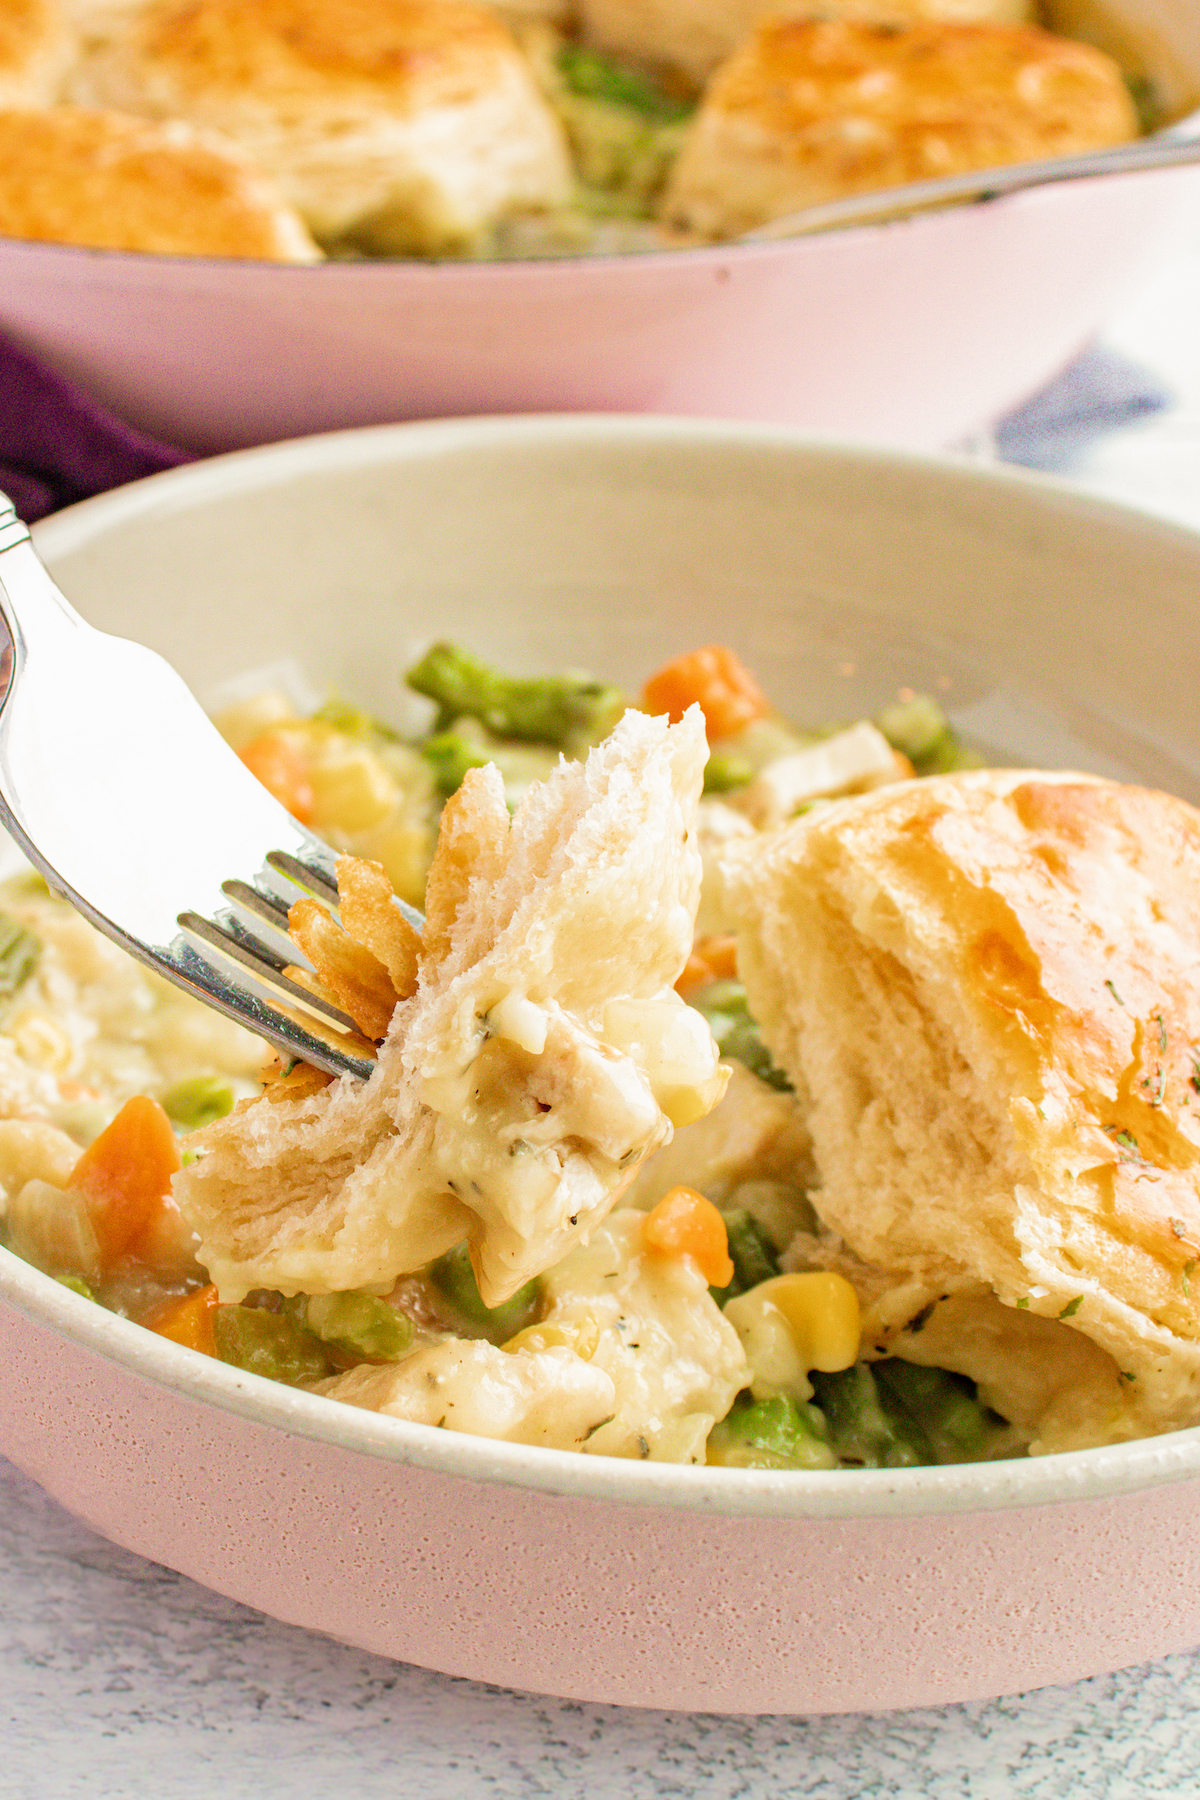 Bowl of chicken pot pie with biscuits.